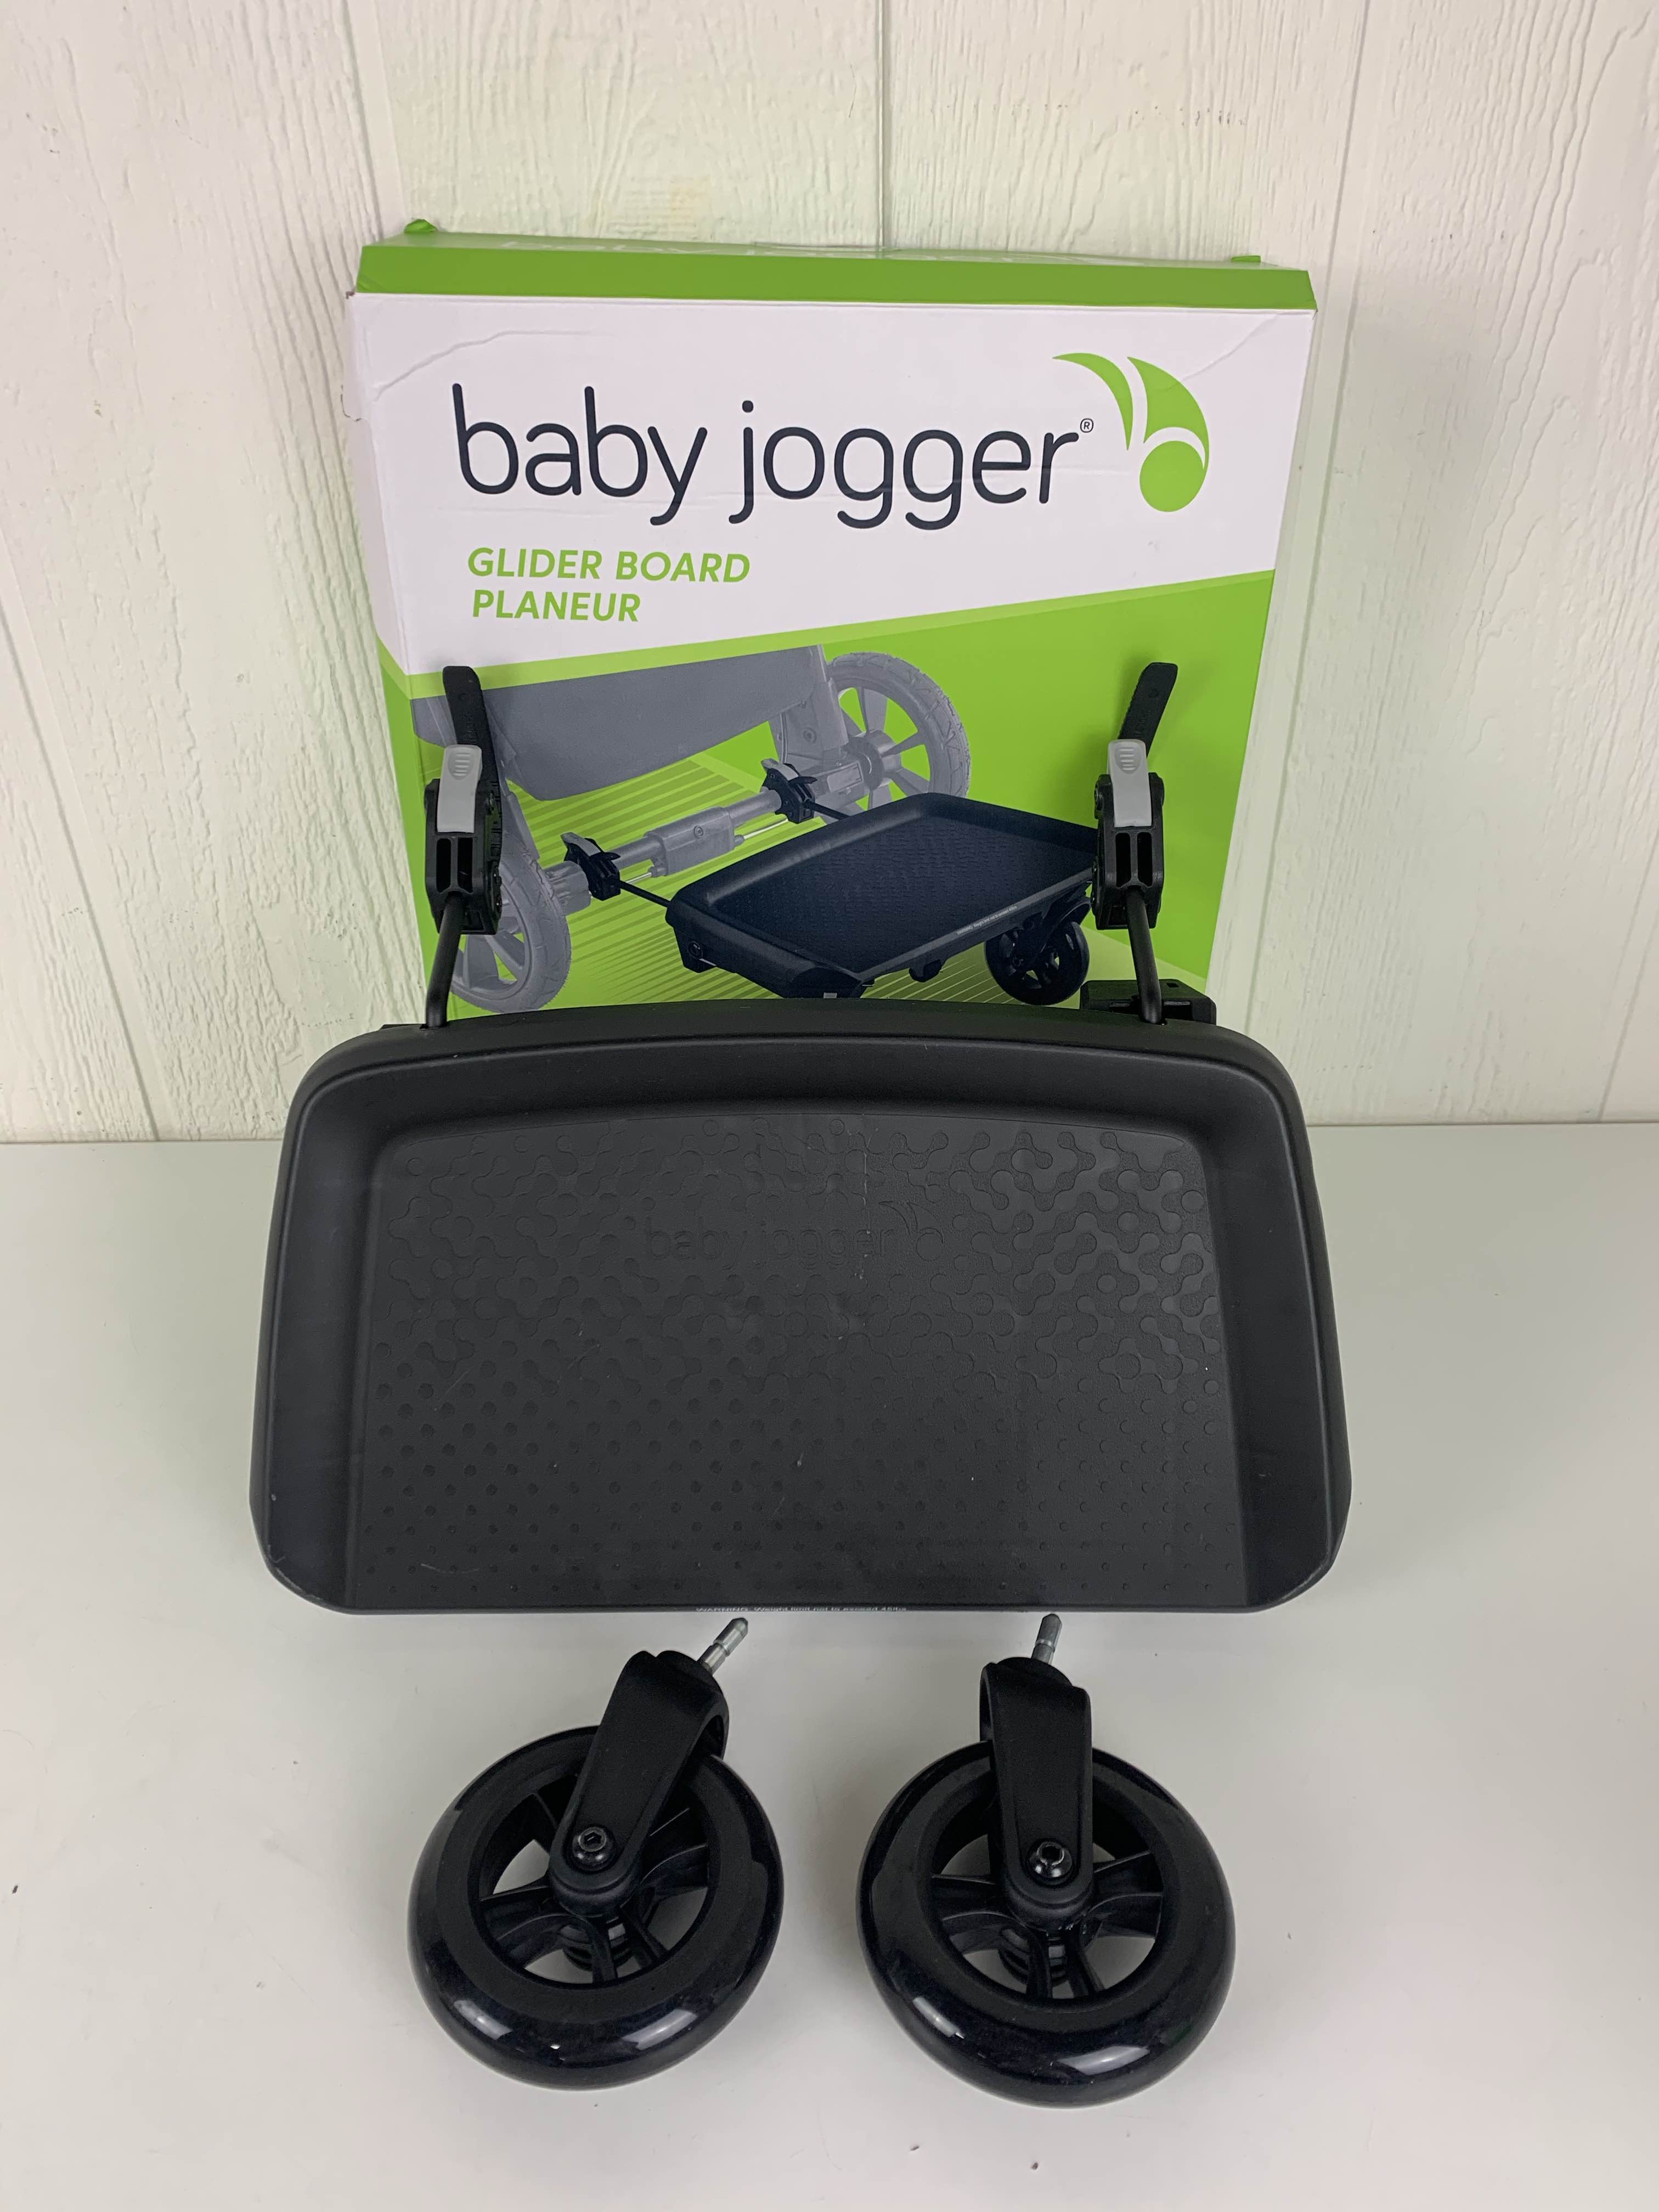 baby jogger glider board used